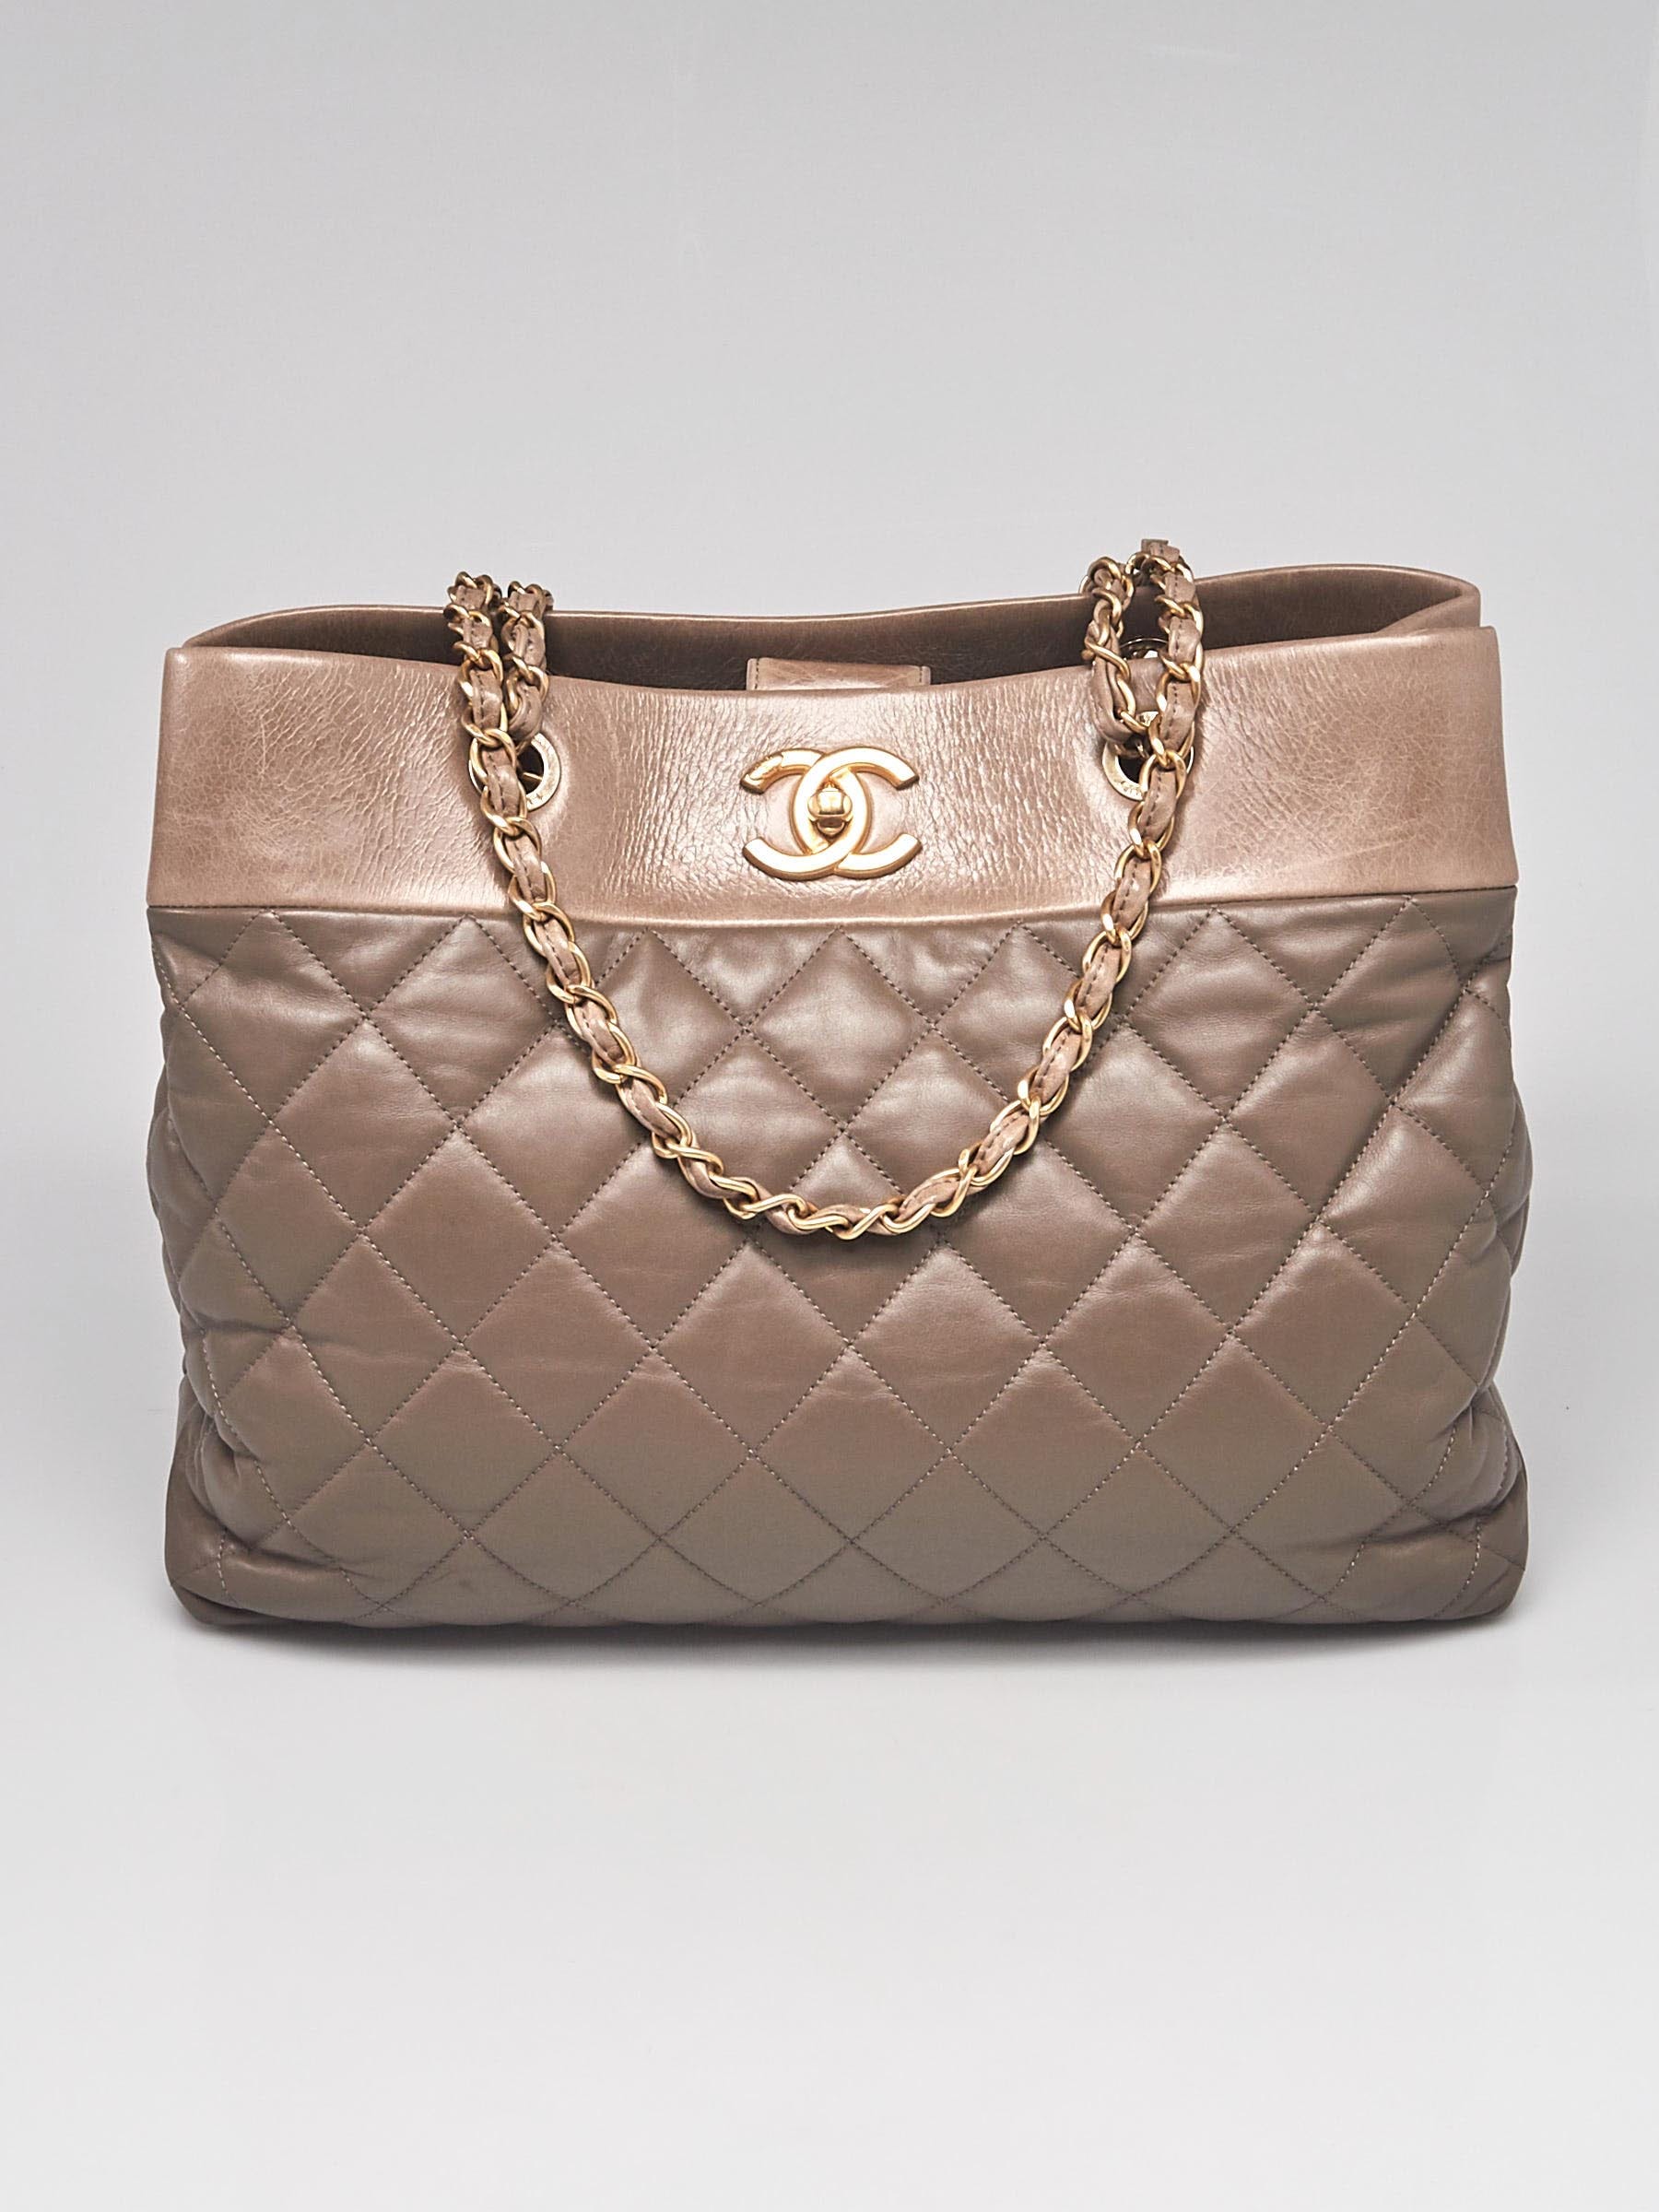 Chanel Brown Quilted Leather Soft Elegance Large Tote Bag - Yoogi's Closet